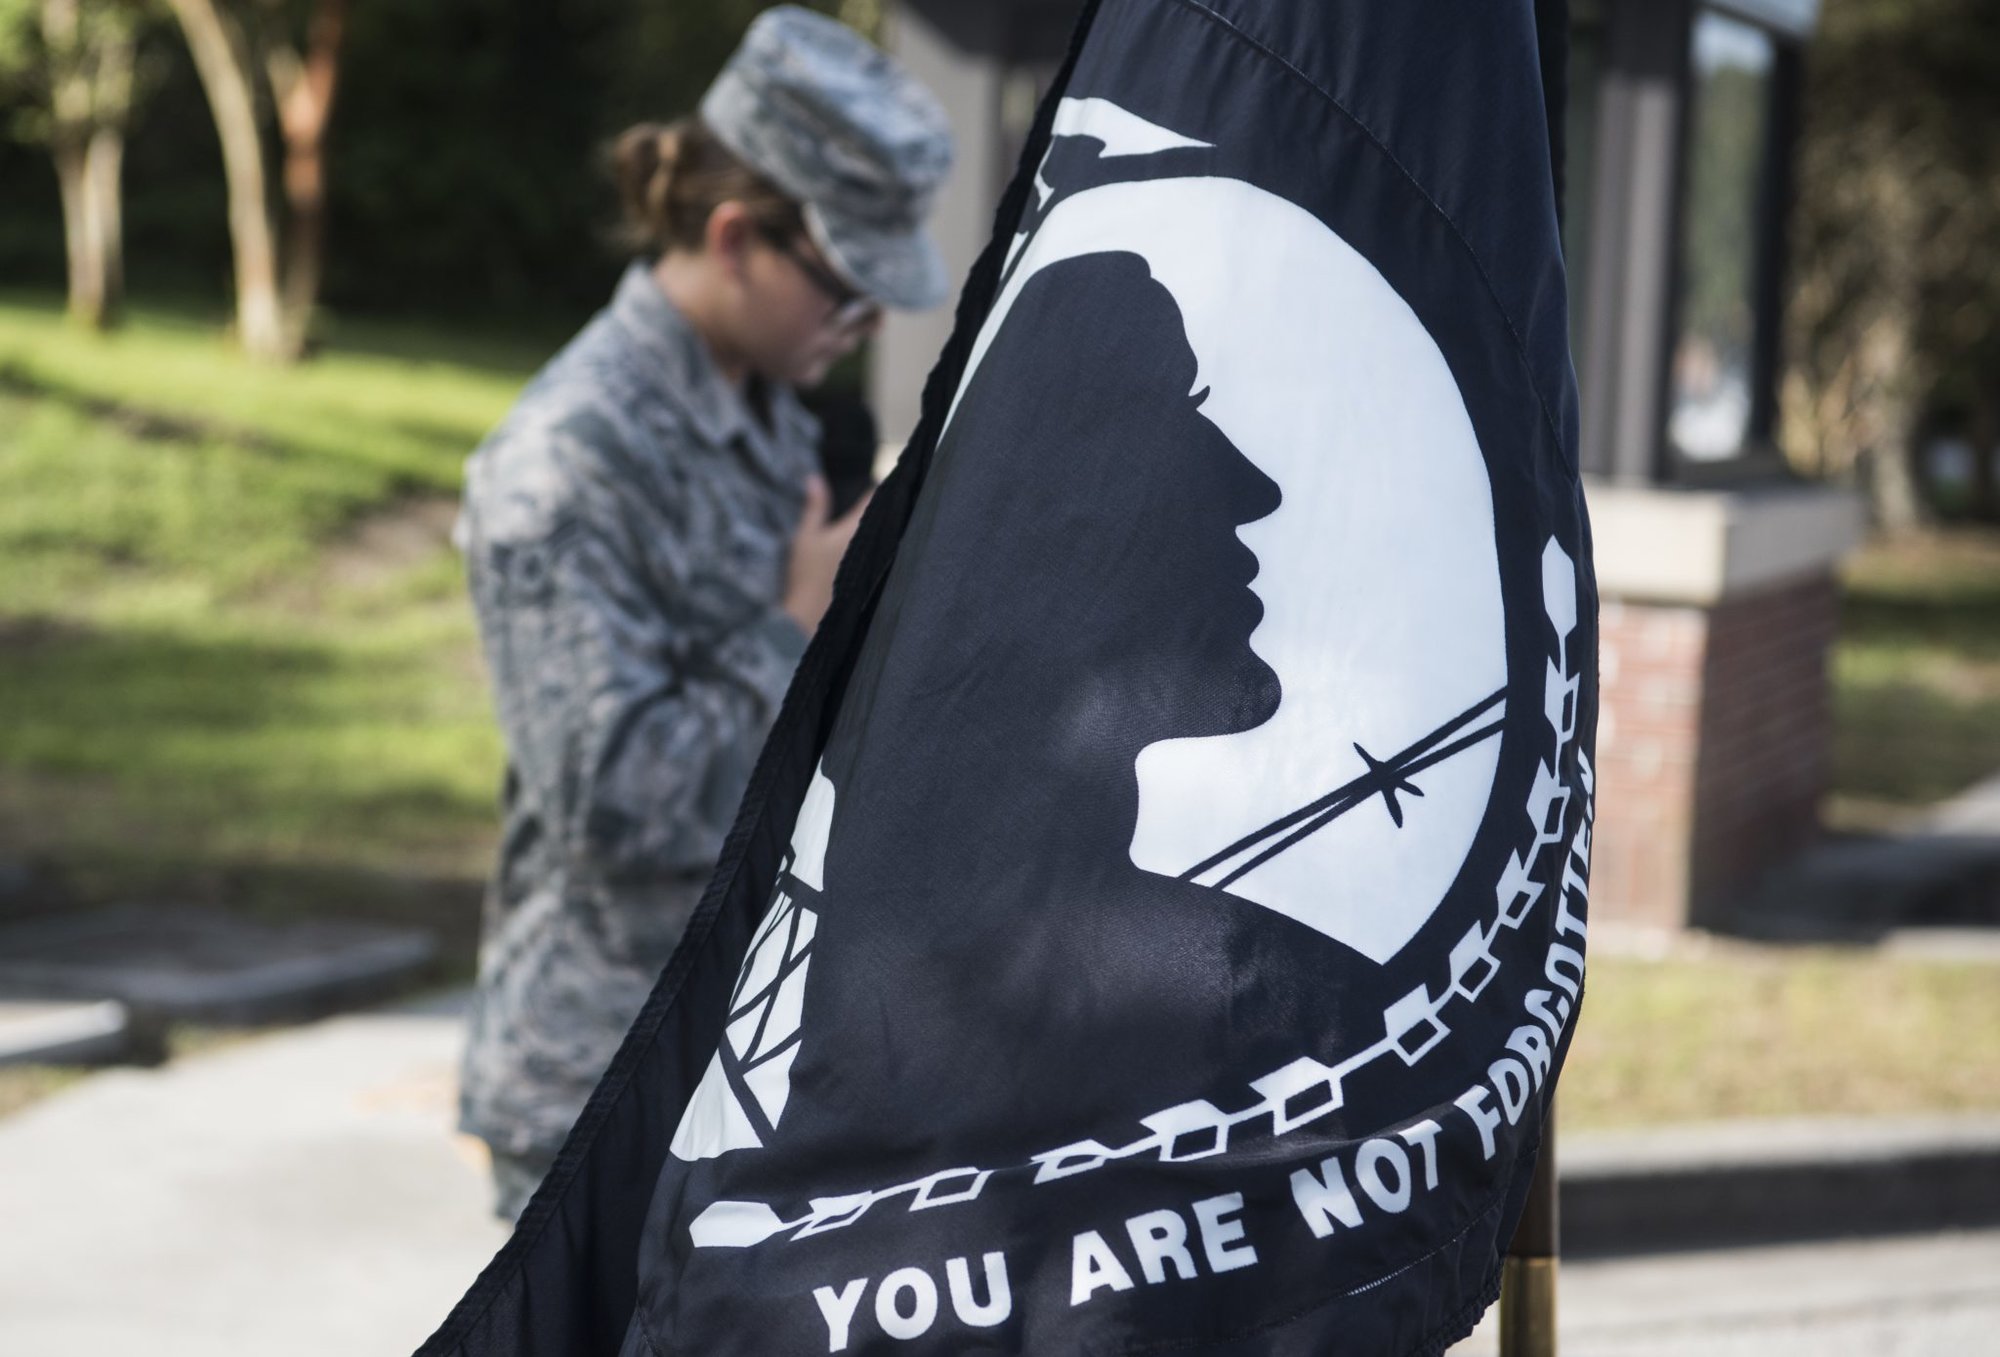 Airman 1st Class Summer Bell, 437th Maintenance Squadron munitions controller, reads the names of prisoners of war and those missing in action Sept. 28, 2018, at Joint Base Charleston, S.C. The National League of Families’ POW/MIA flag symbolizes the United States’ resolve to never forget prisoners of war or those who served their country in conflicts and are still missing.